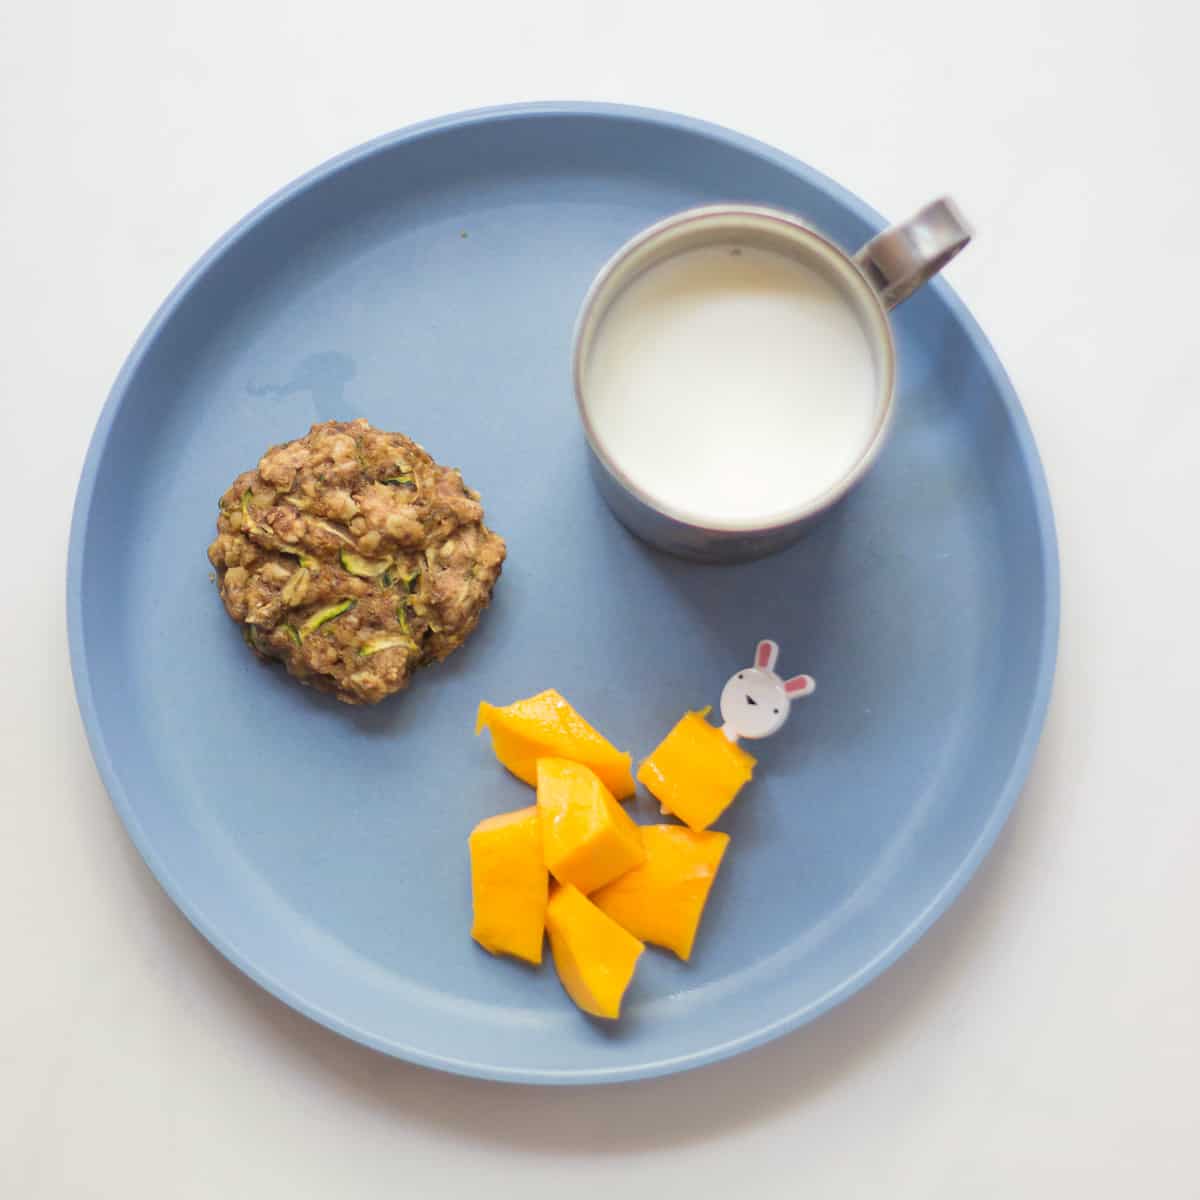 A cookie with mangoes and a glass of milk.